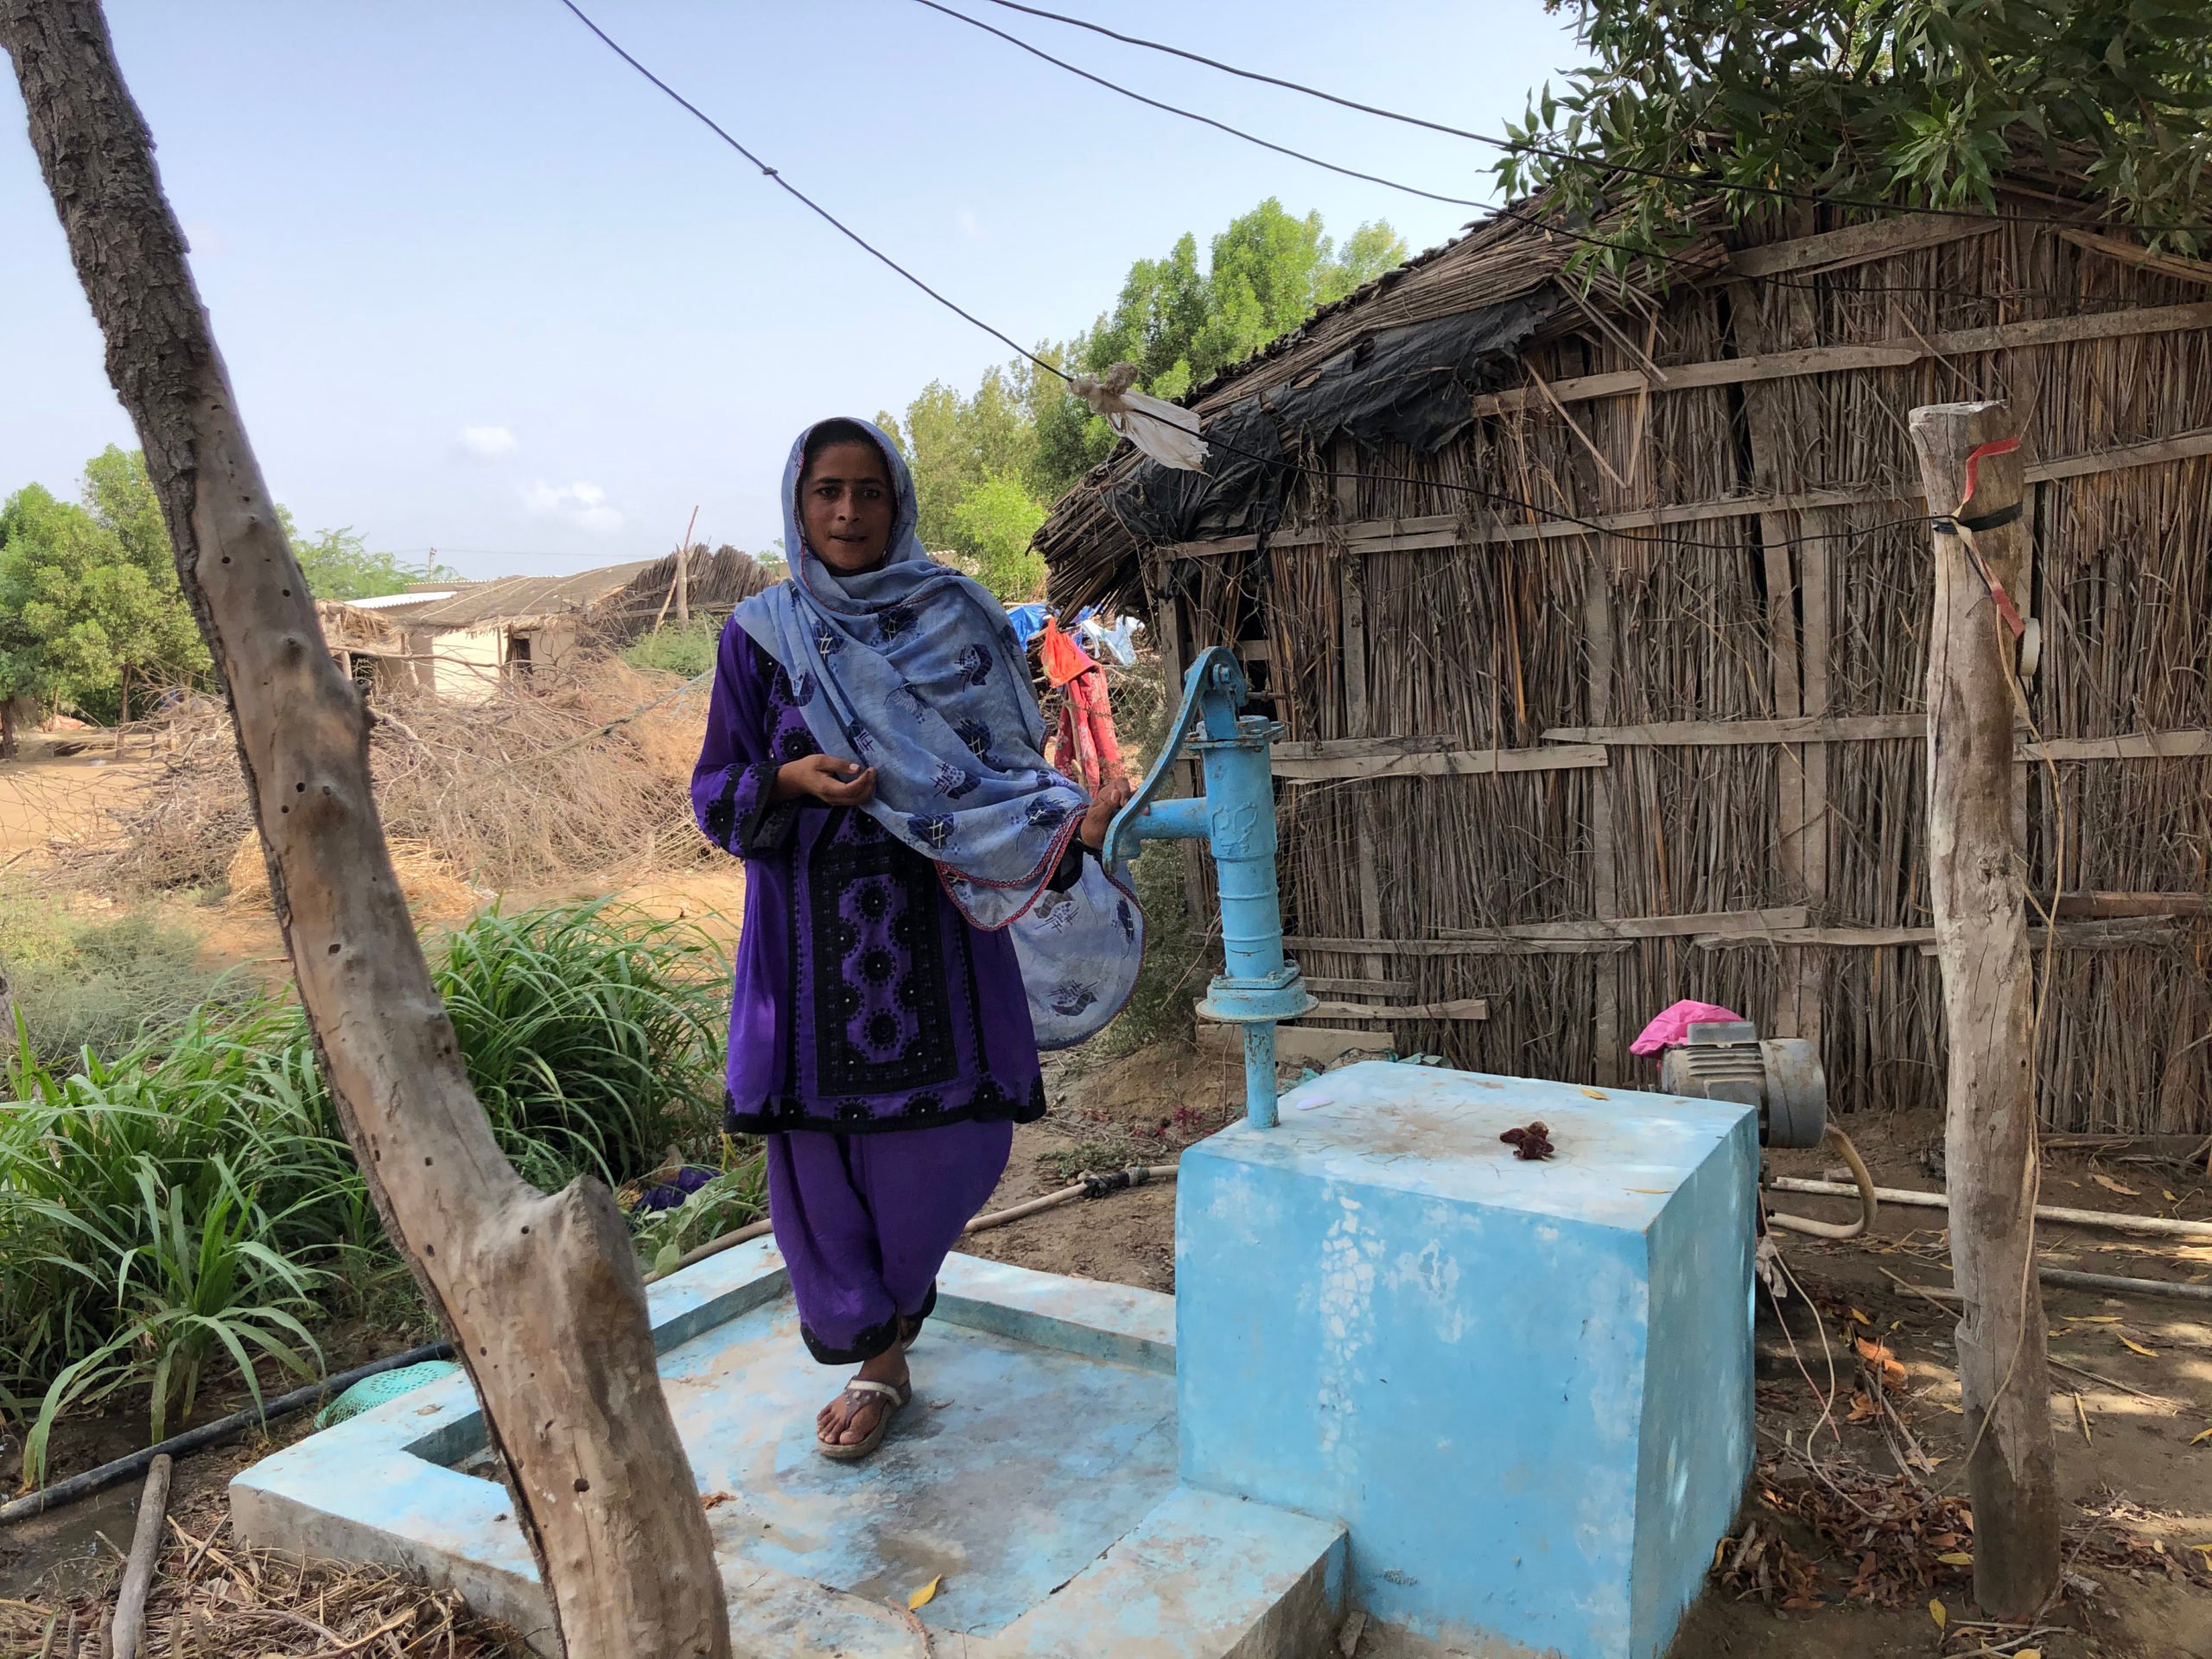 <p>Malda Barkat stands next to a hand pump near her house in the village of Rato Khan Rind, in Thatta district. The intermittent supply means villagers must fetch water from a distance on a donkey cart (Image: Zofeen Ebrahim)</p>